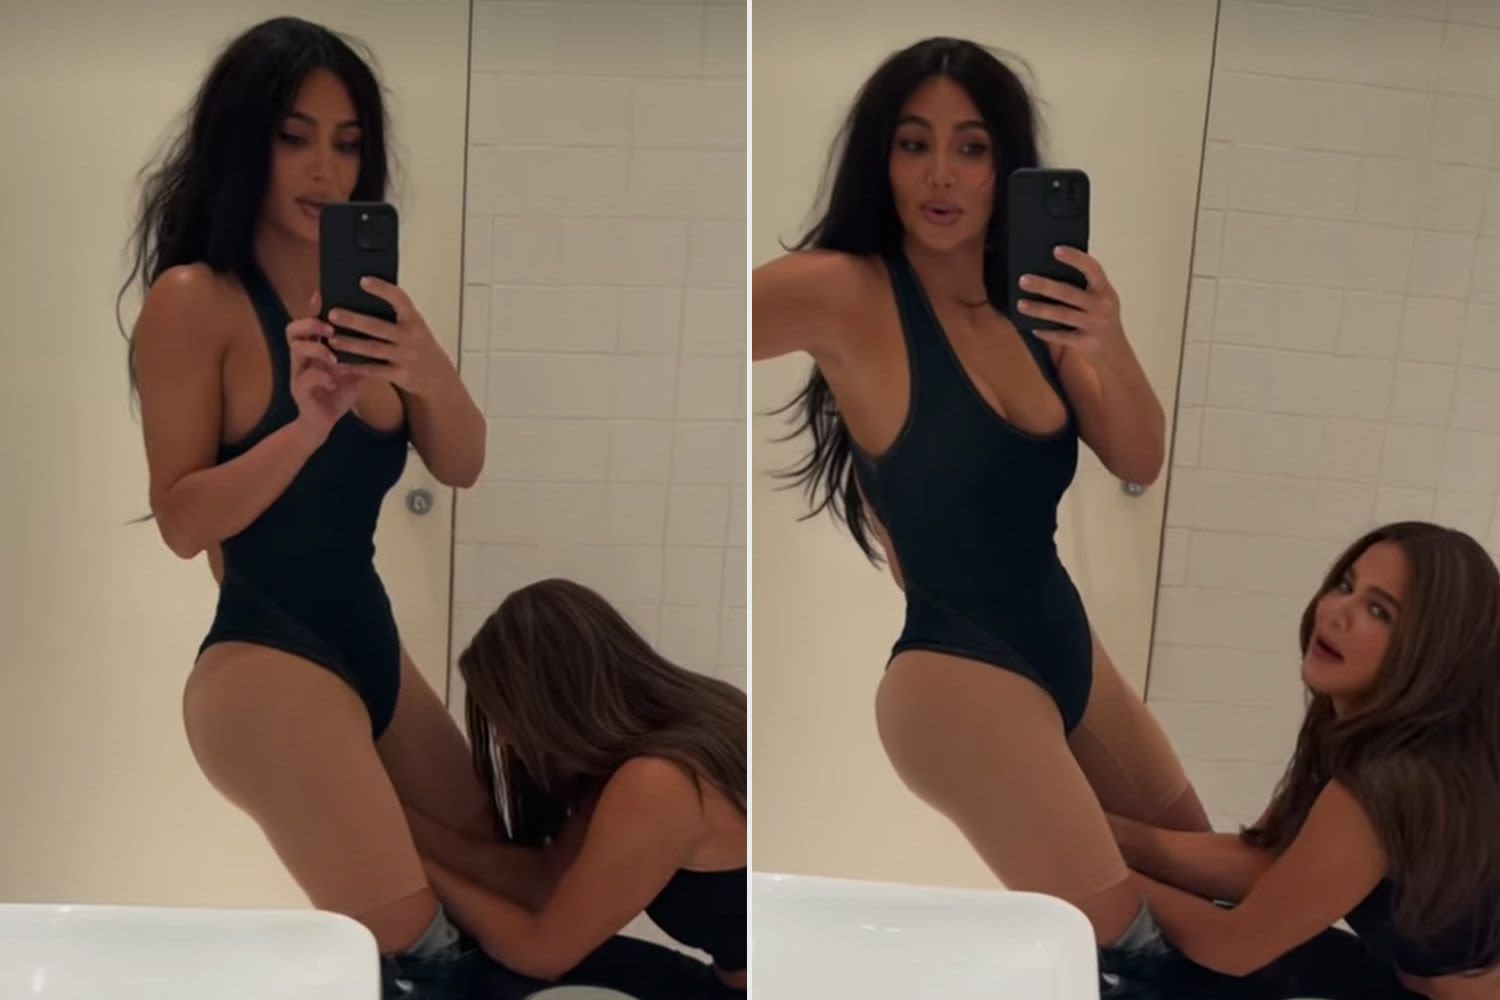 Kim Kardashian Shares Hilarious Video of Sister Khloé Fastening Her Bodysuit in Bathroom: ‘Things I Find in My Phone’